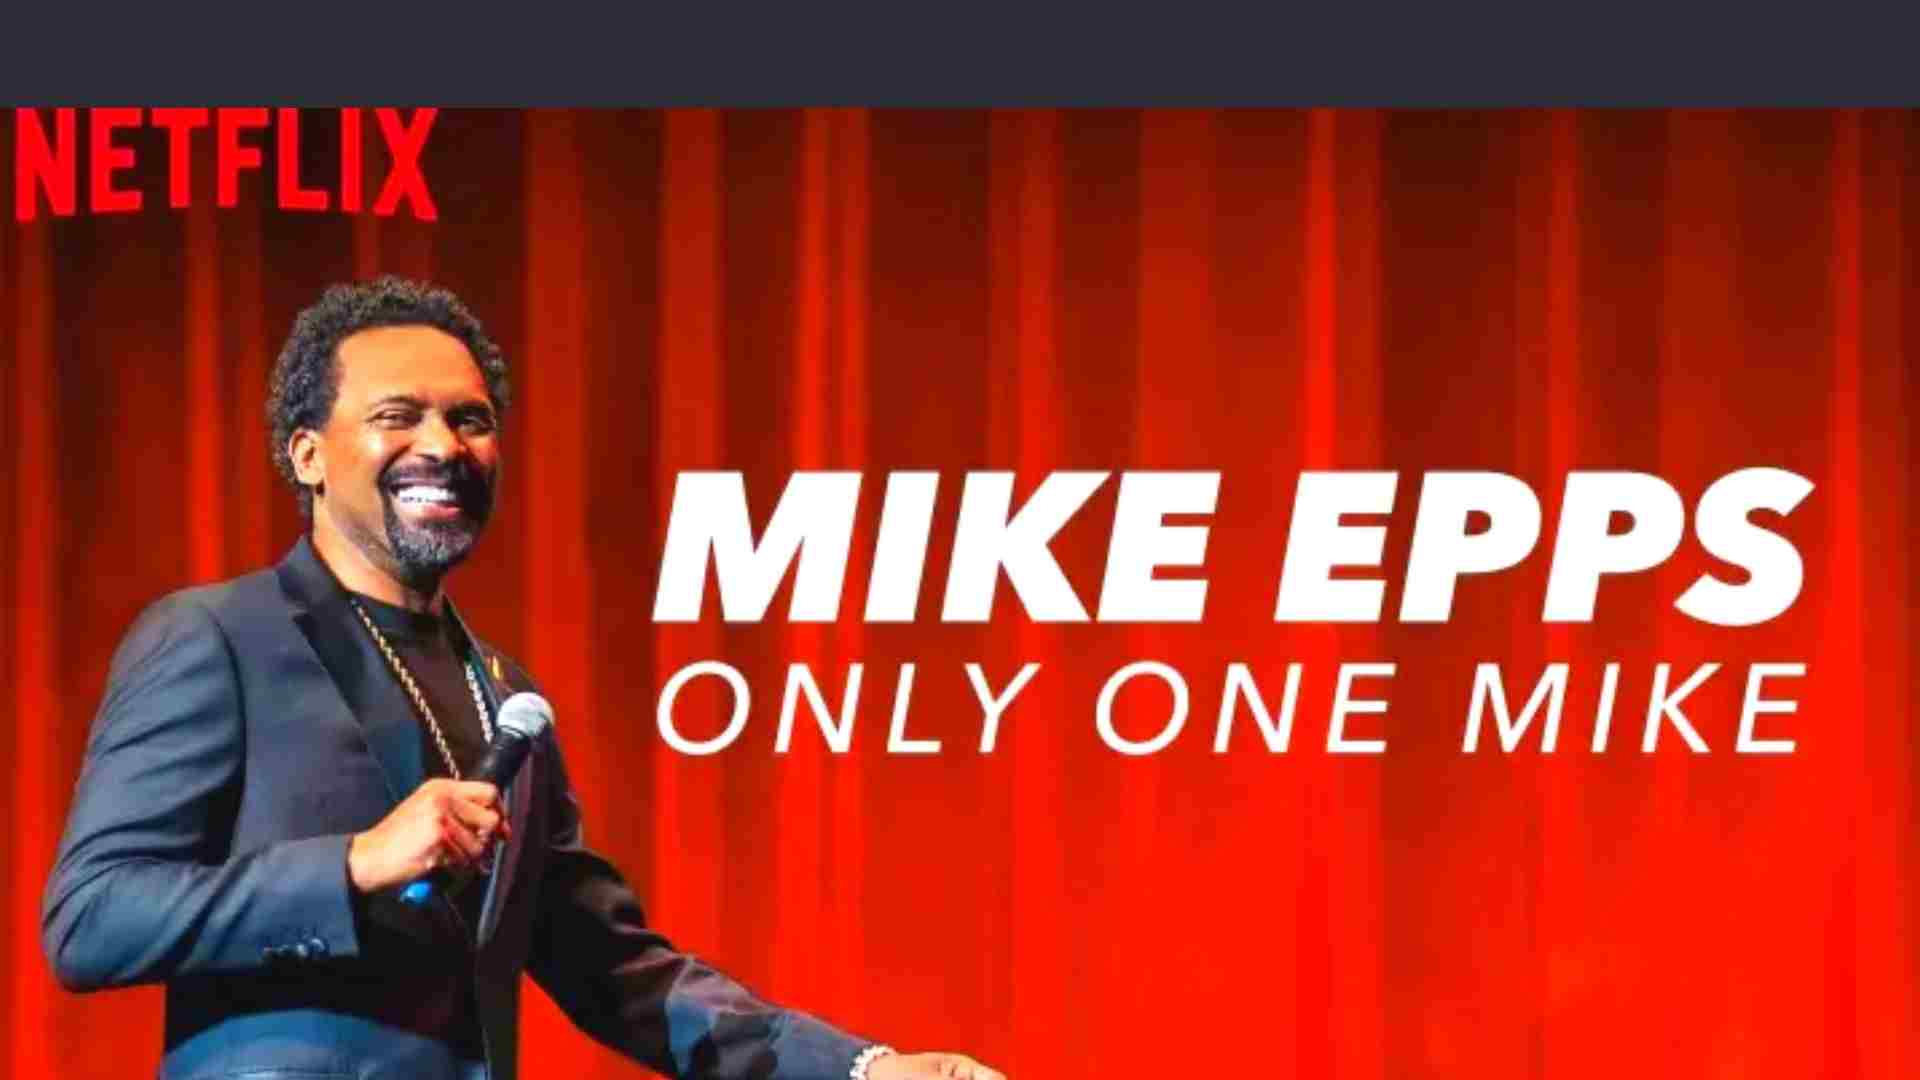 Mike Epps: Indiana Mike Parents guide and Age Rating | 2022